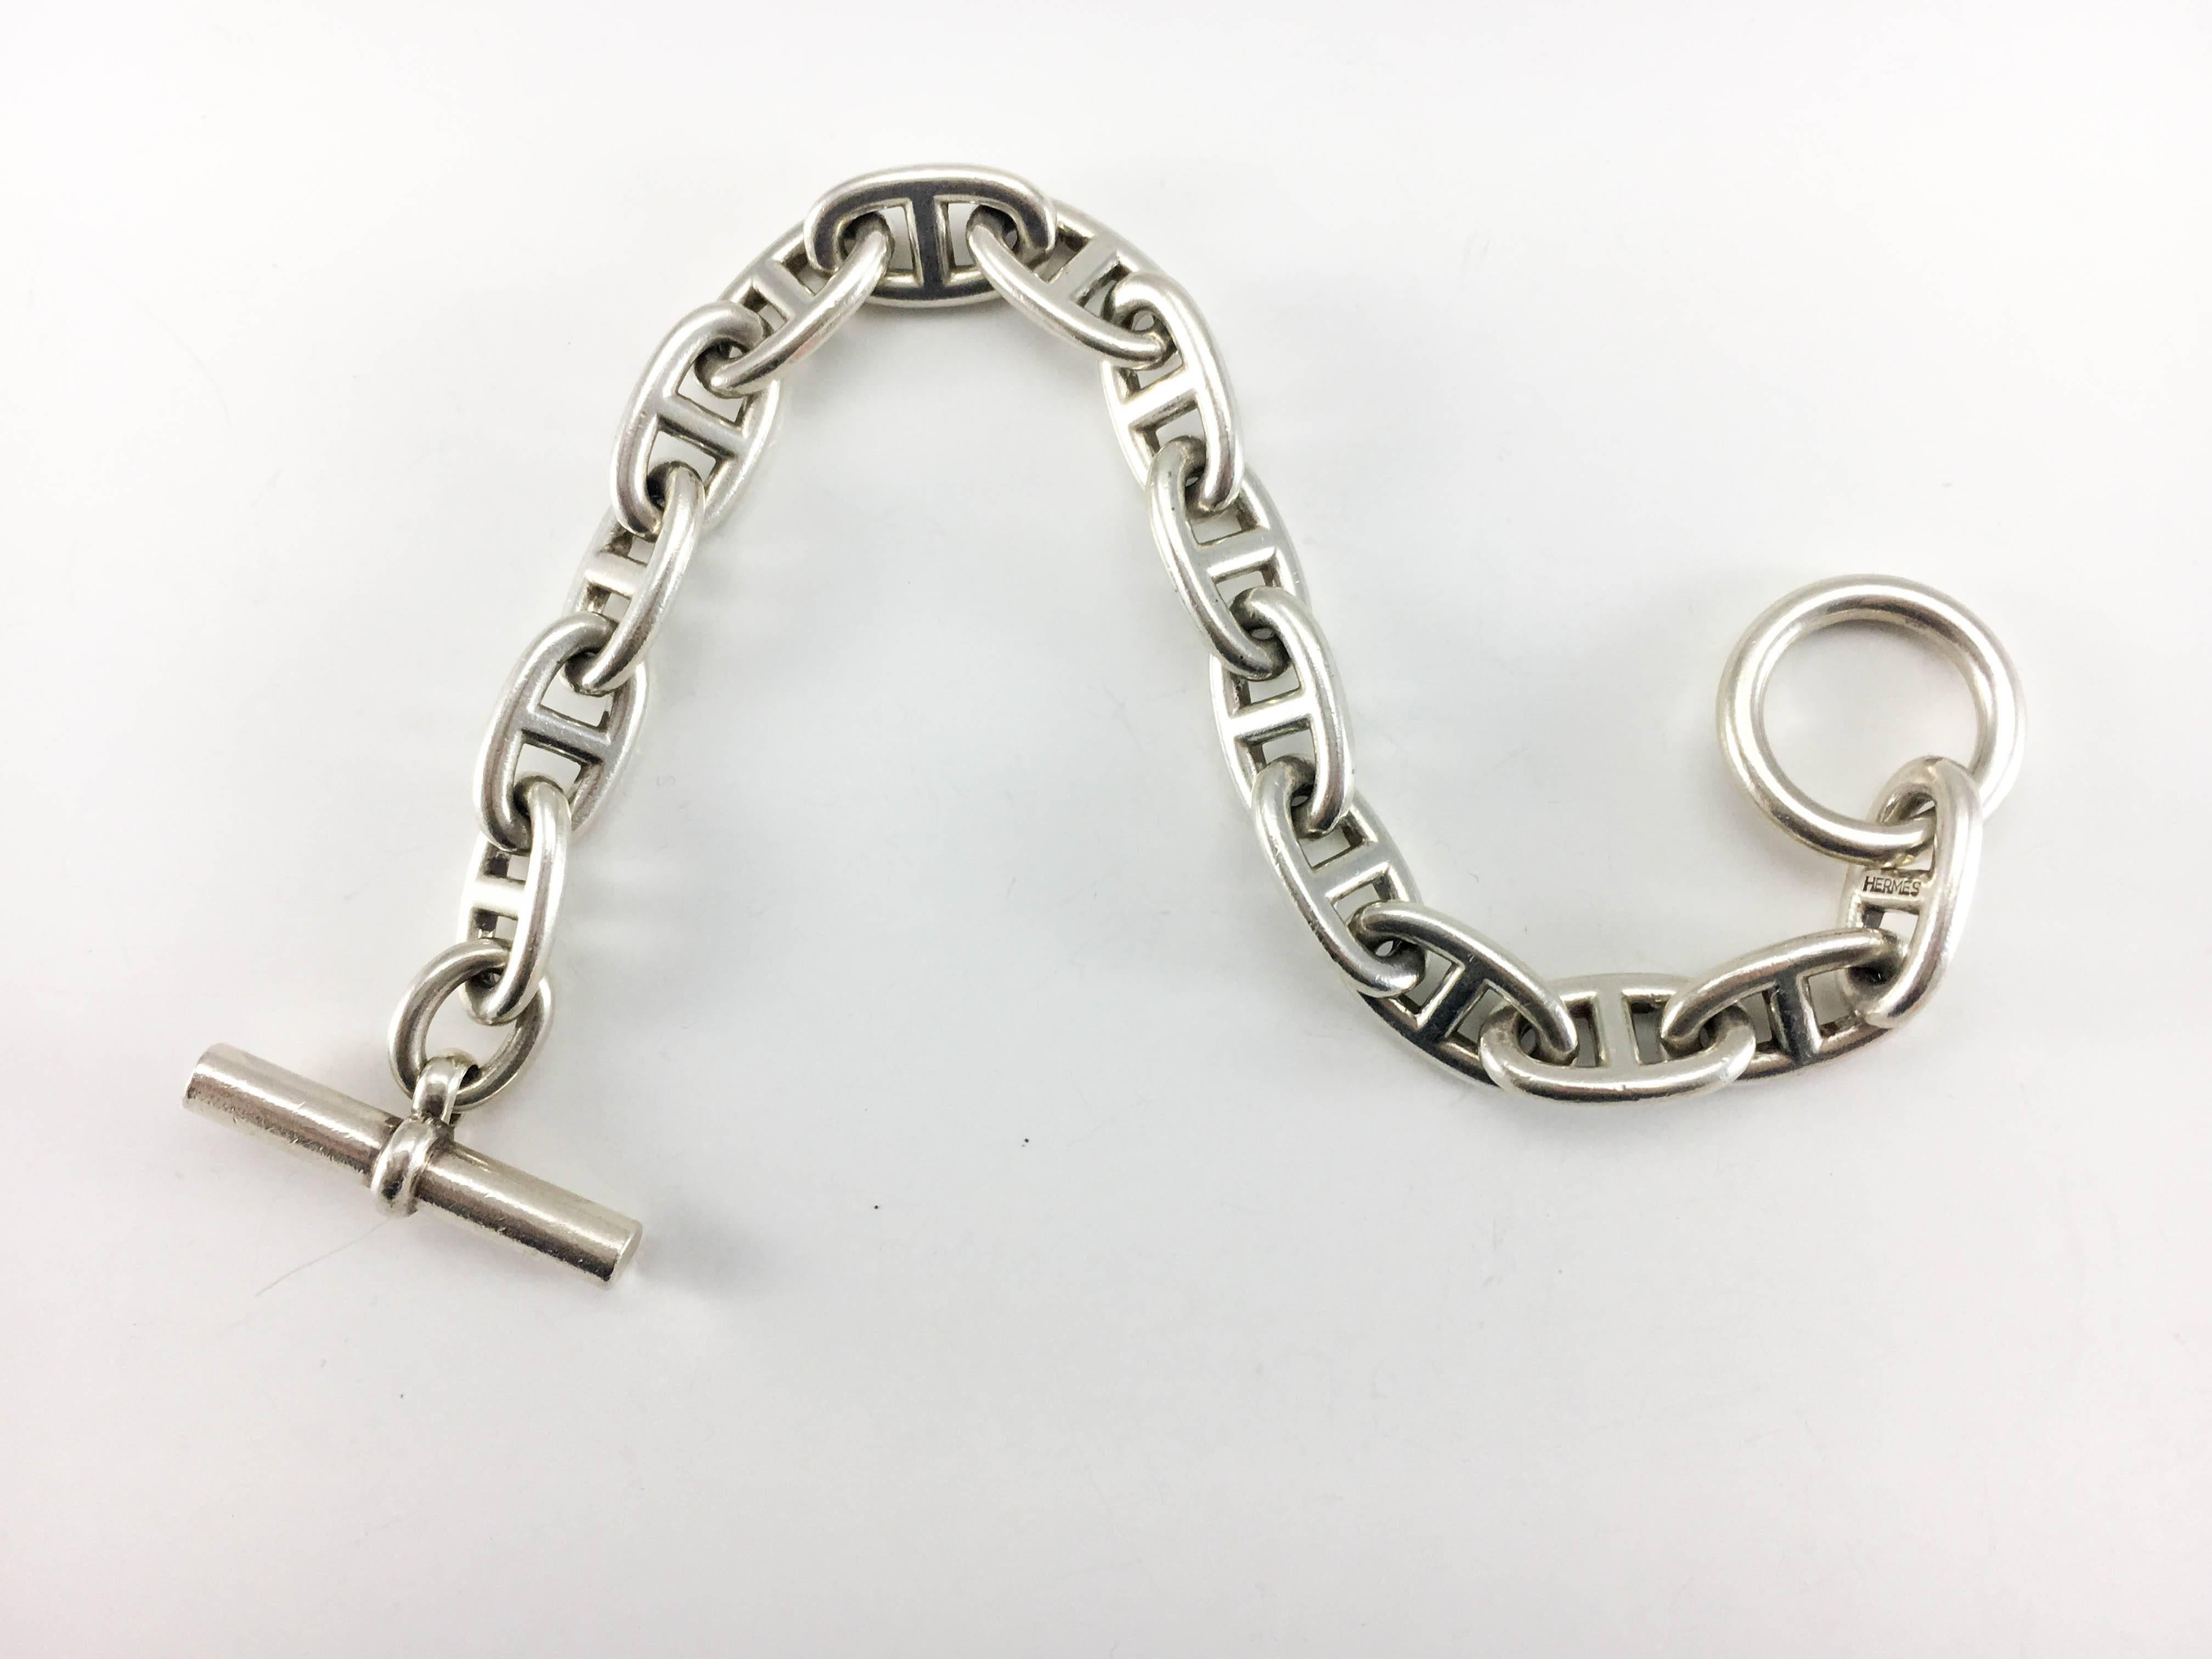 Hermes Chaîne d'Ancre Silver Bracelet. One of the most iconic designs by Hermes, this Chaîne d'Ancre bracelet is made in solid sterling silver. The size is TGM. Hermes signed and fully hallmarked. Toggle clasp. A very stylish and classic piece by